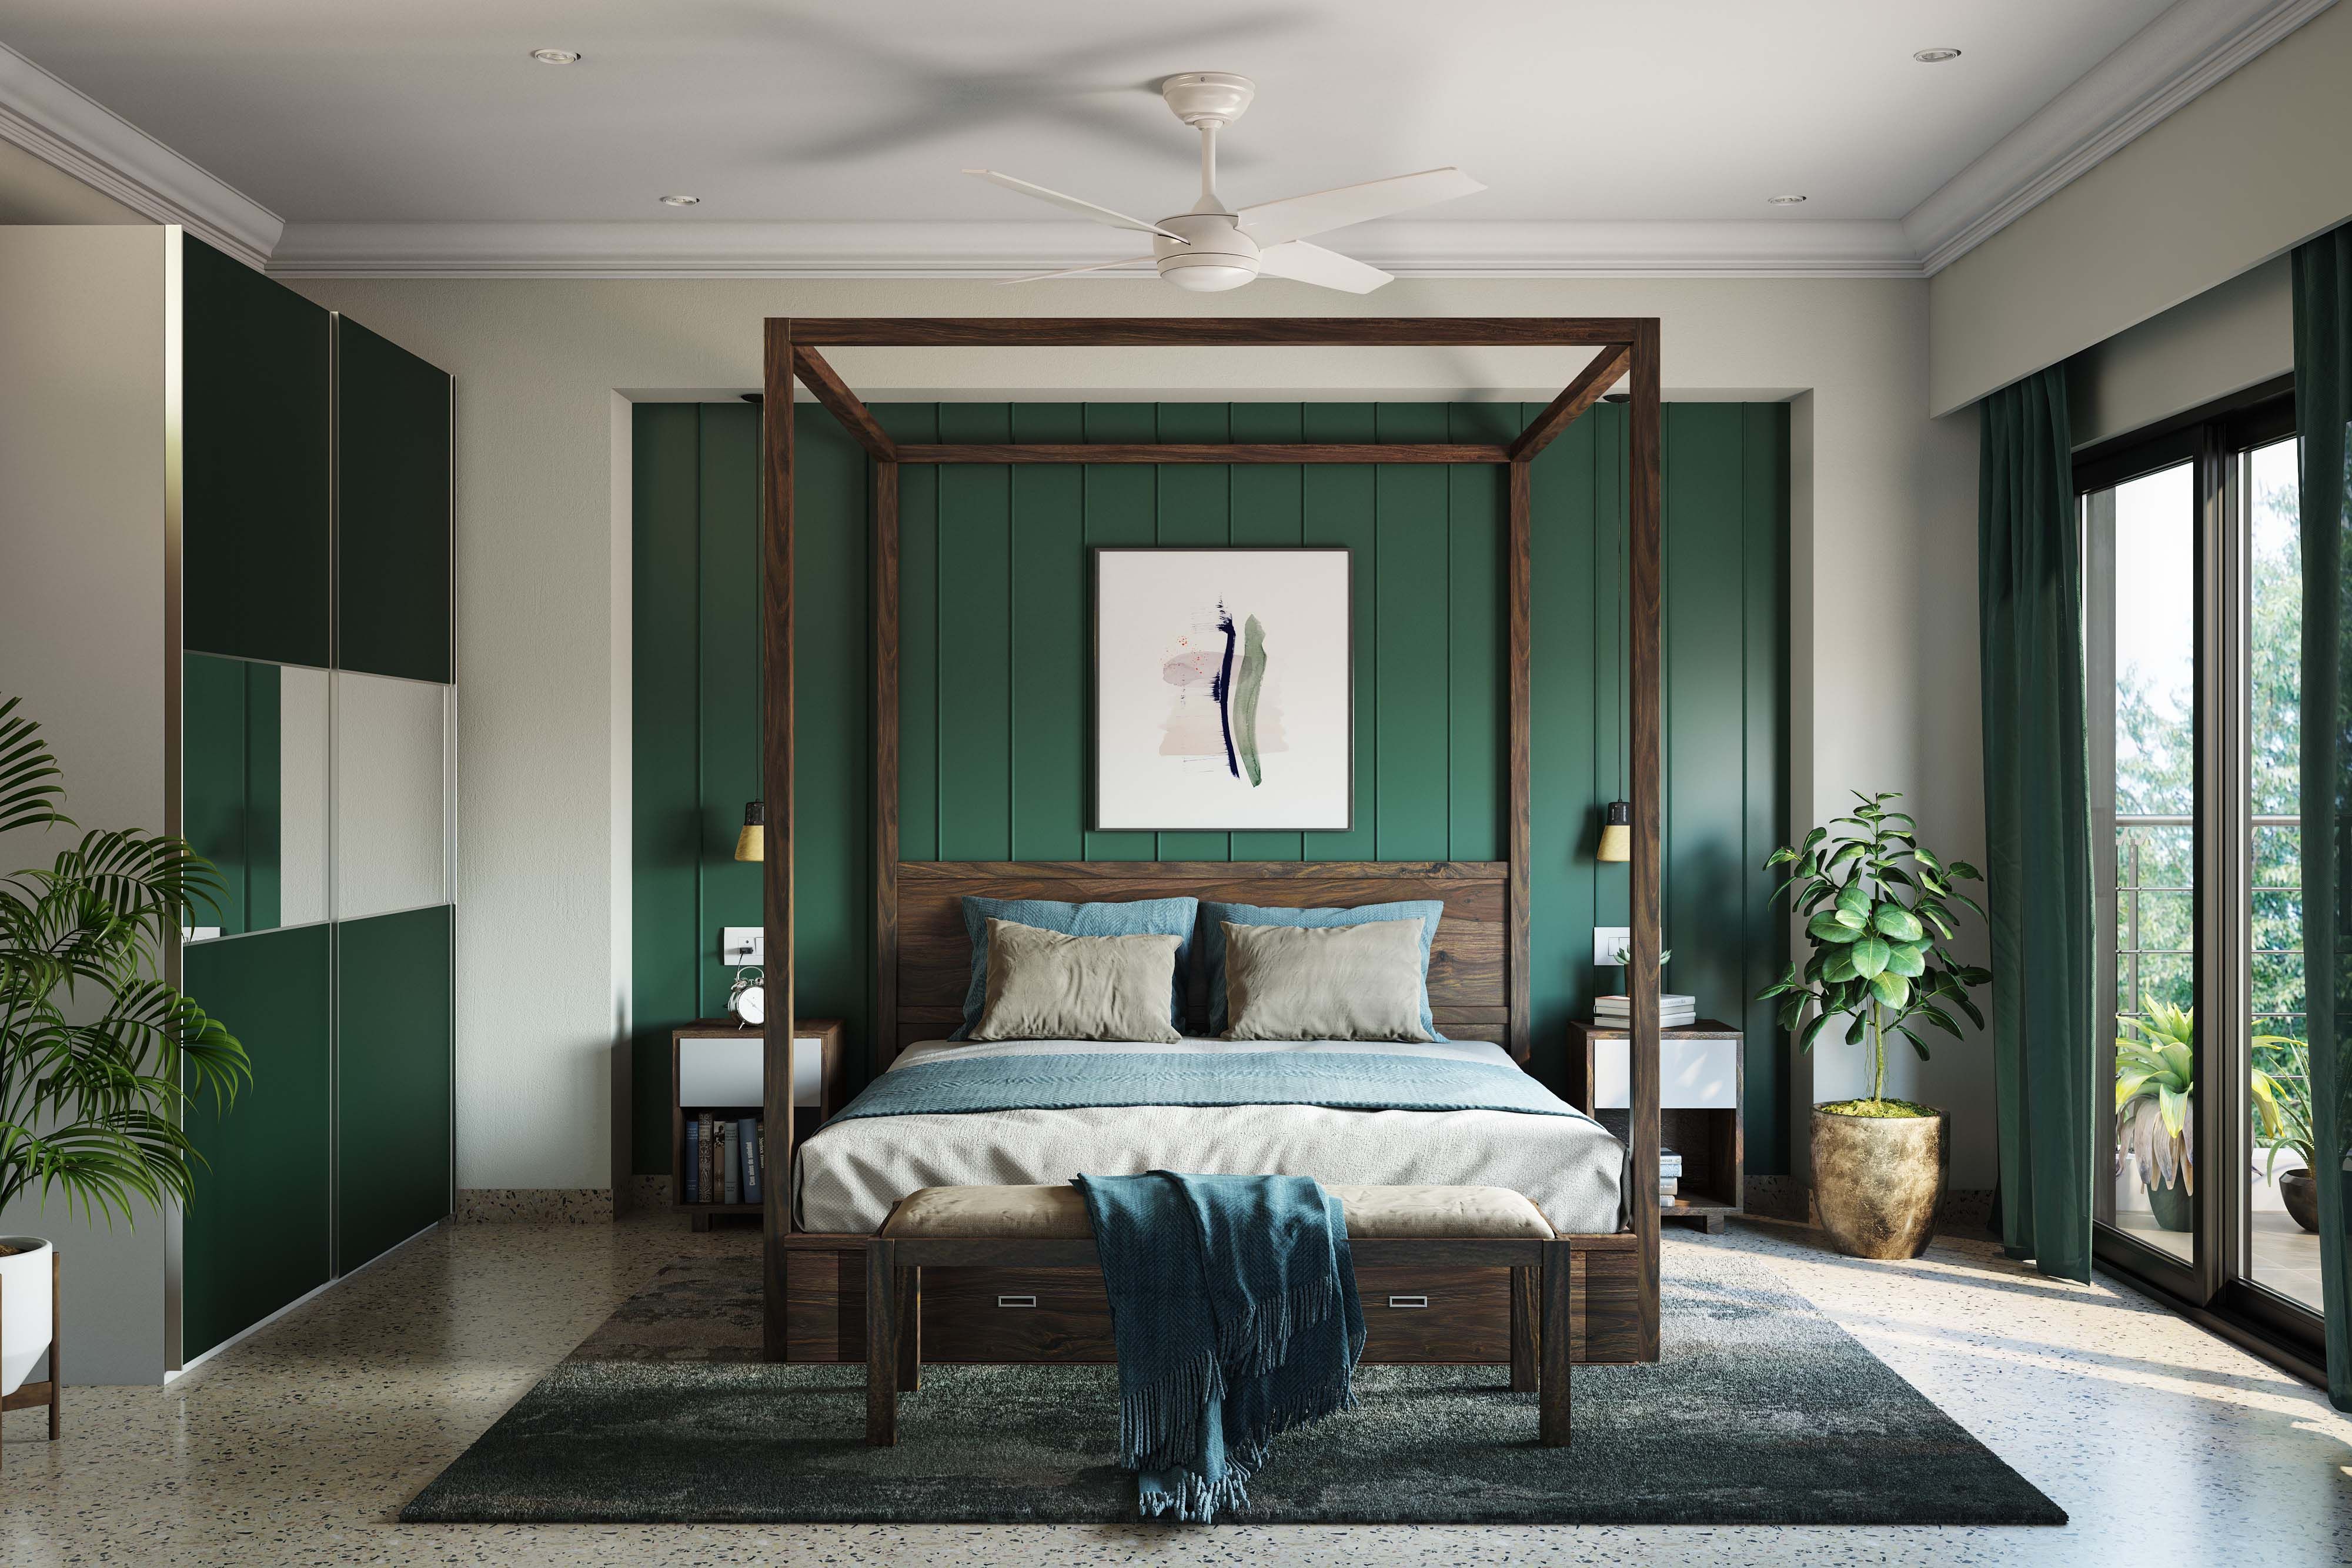 Contemporary Dark Green And White Master Bedroom Design With 4-Poster Wooden Bed